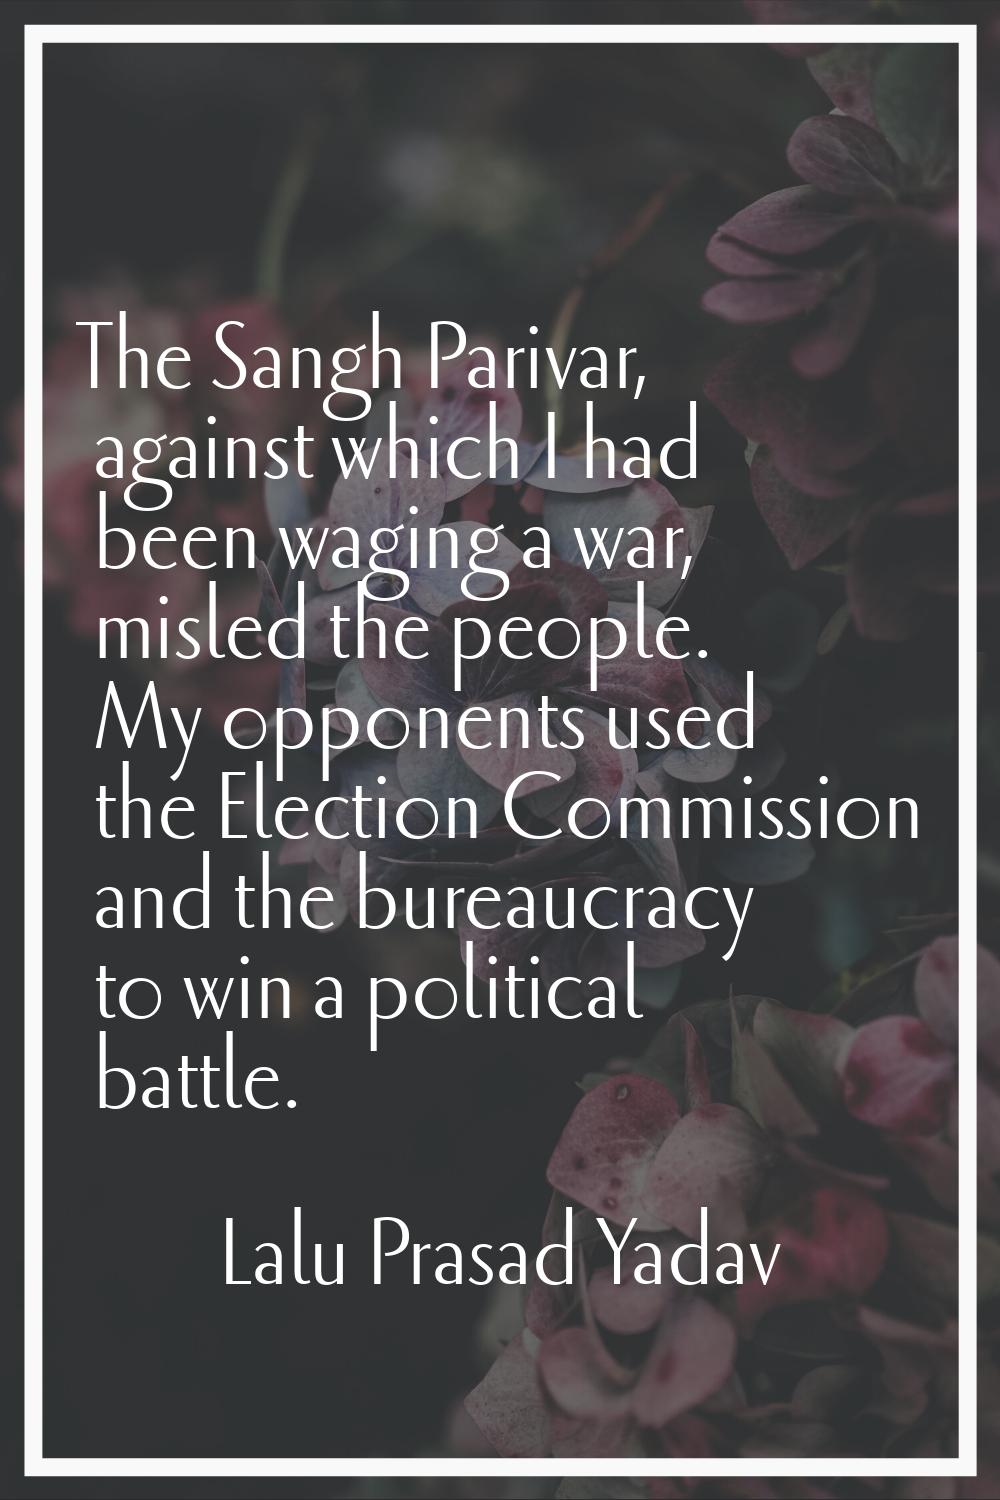 The Sangh Parivar, against which I had been waging a war, misled the people. My opponents used the 